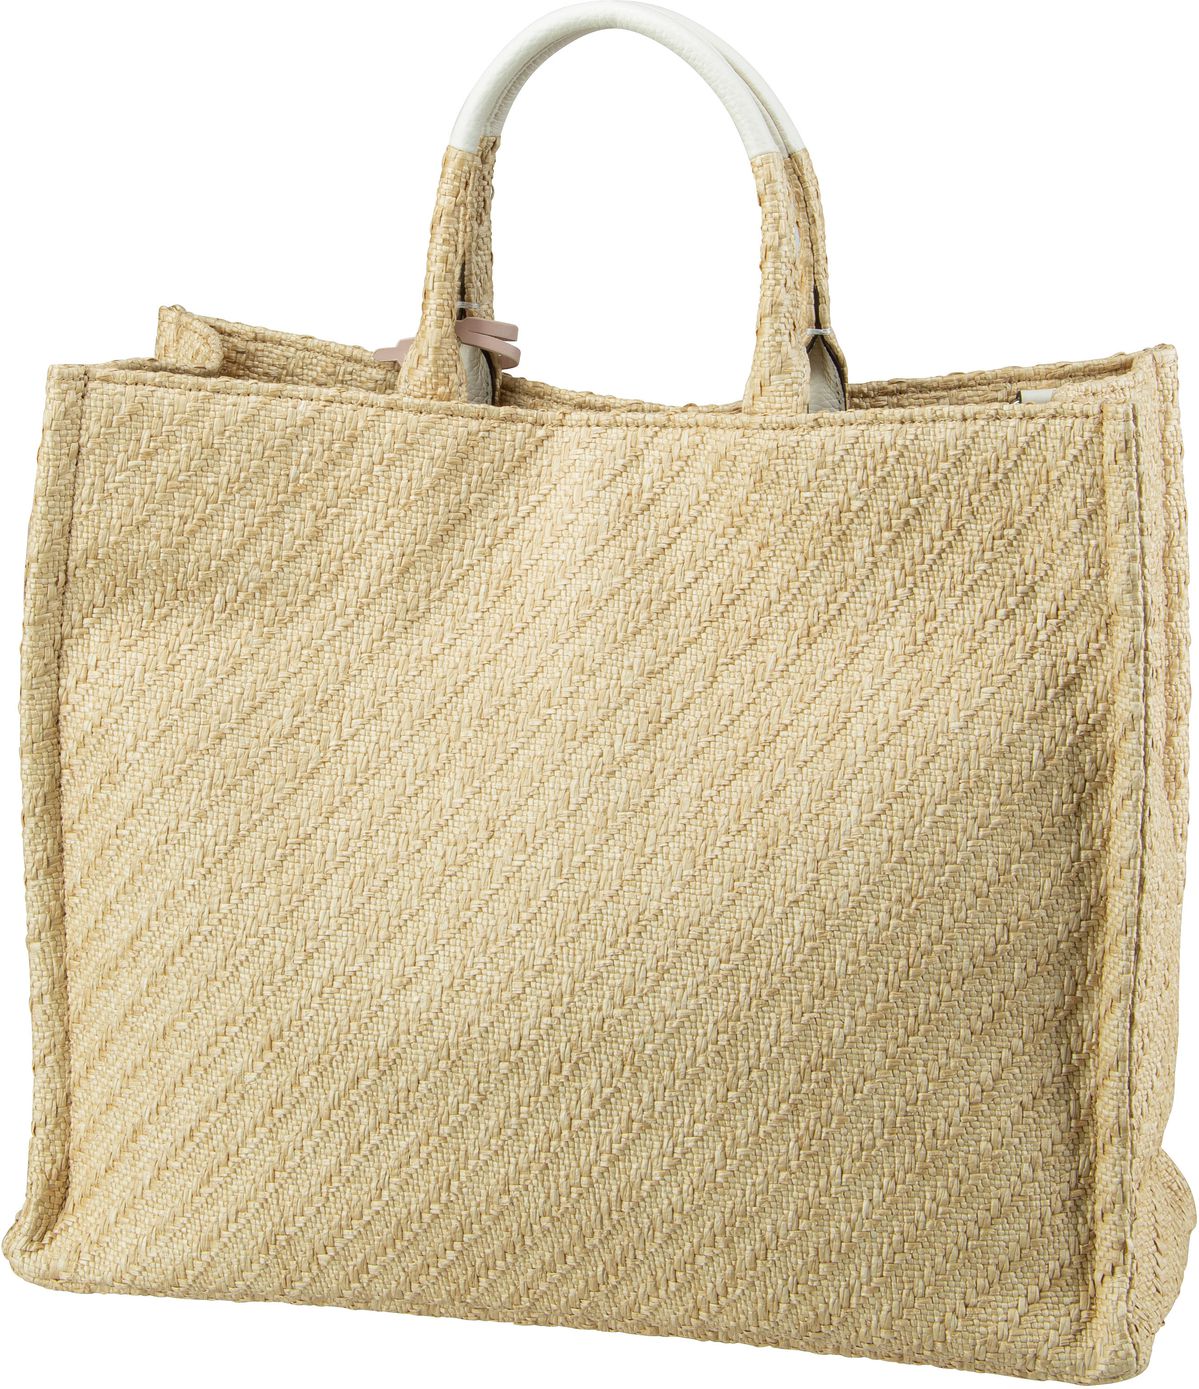 Coccinelle Never Without Bag Rafia 1801 - Natural/White